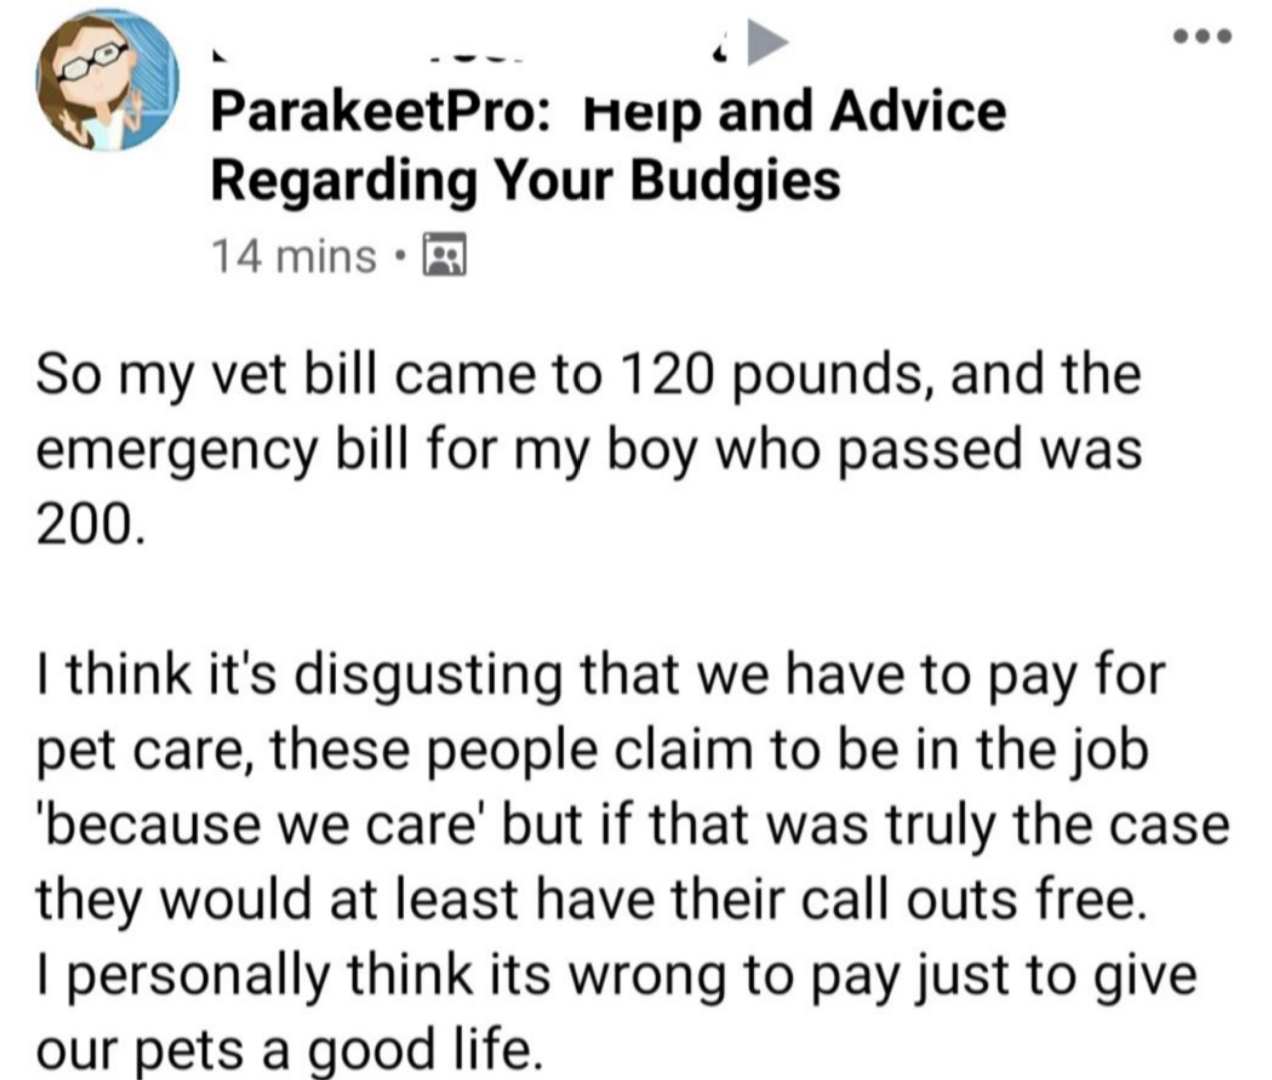 &quot;I think it&#x27;s disgusting we have to pay for pet care...&quot;